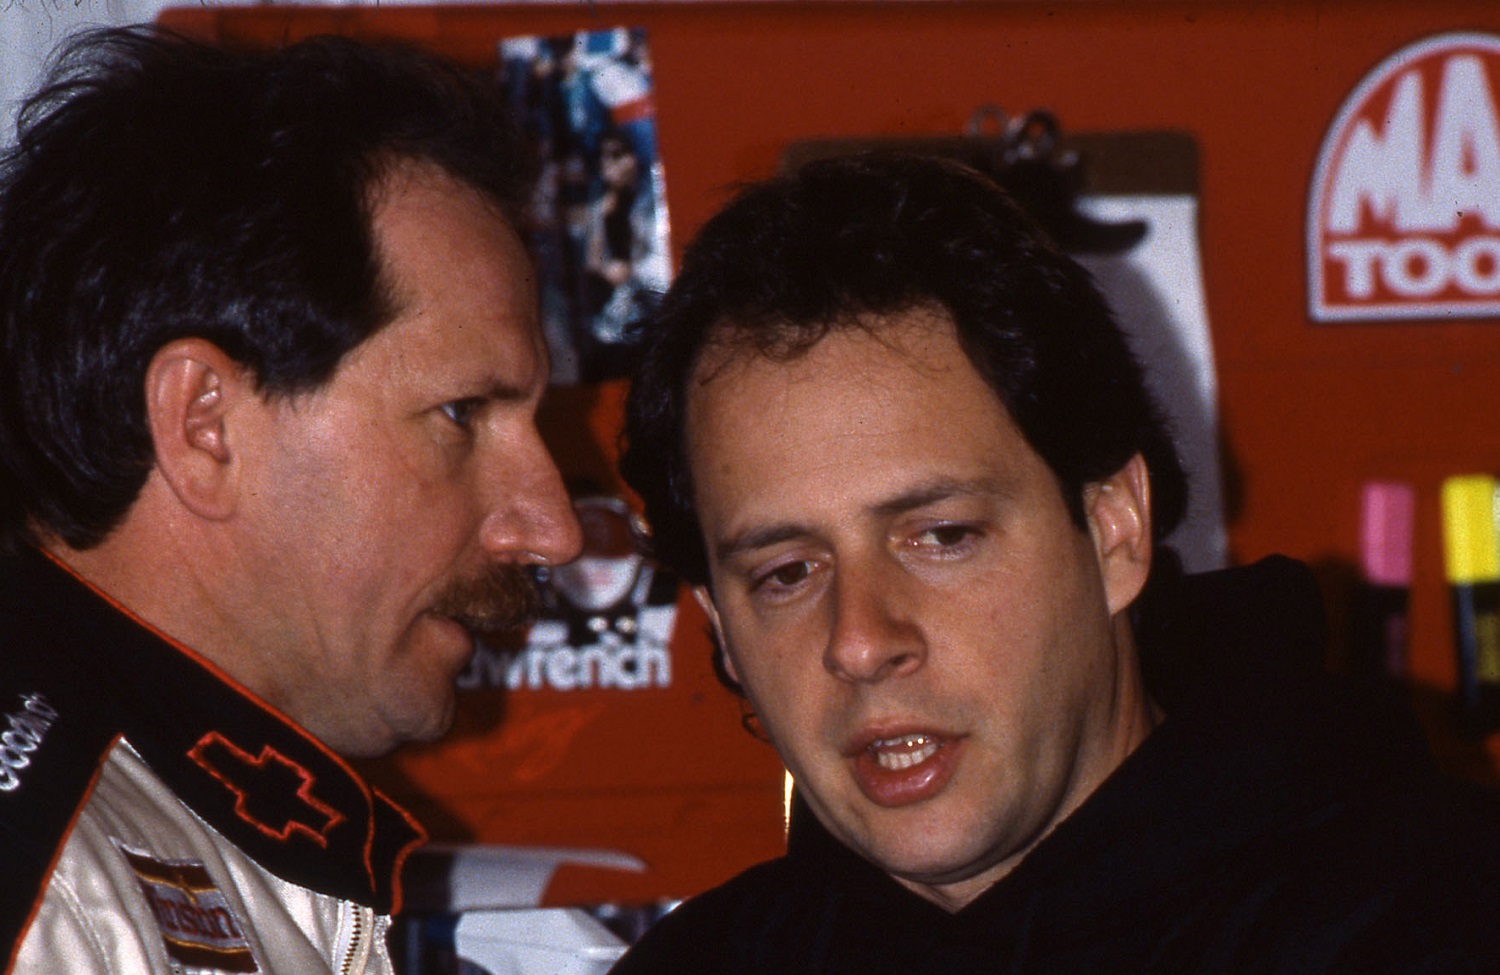 Kirk Shelmerdine, right, was crew chief for Richard Childress Racing and driver Dale Earnhardt from 1982-92, scoring 46 NASCAR Cup victories and four season championships.